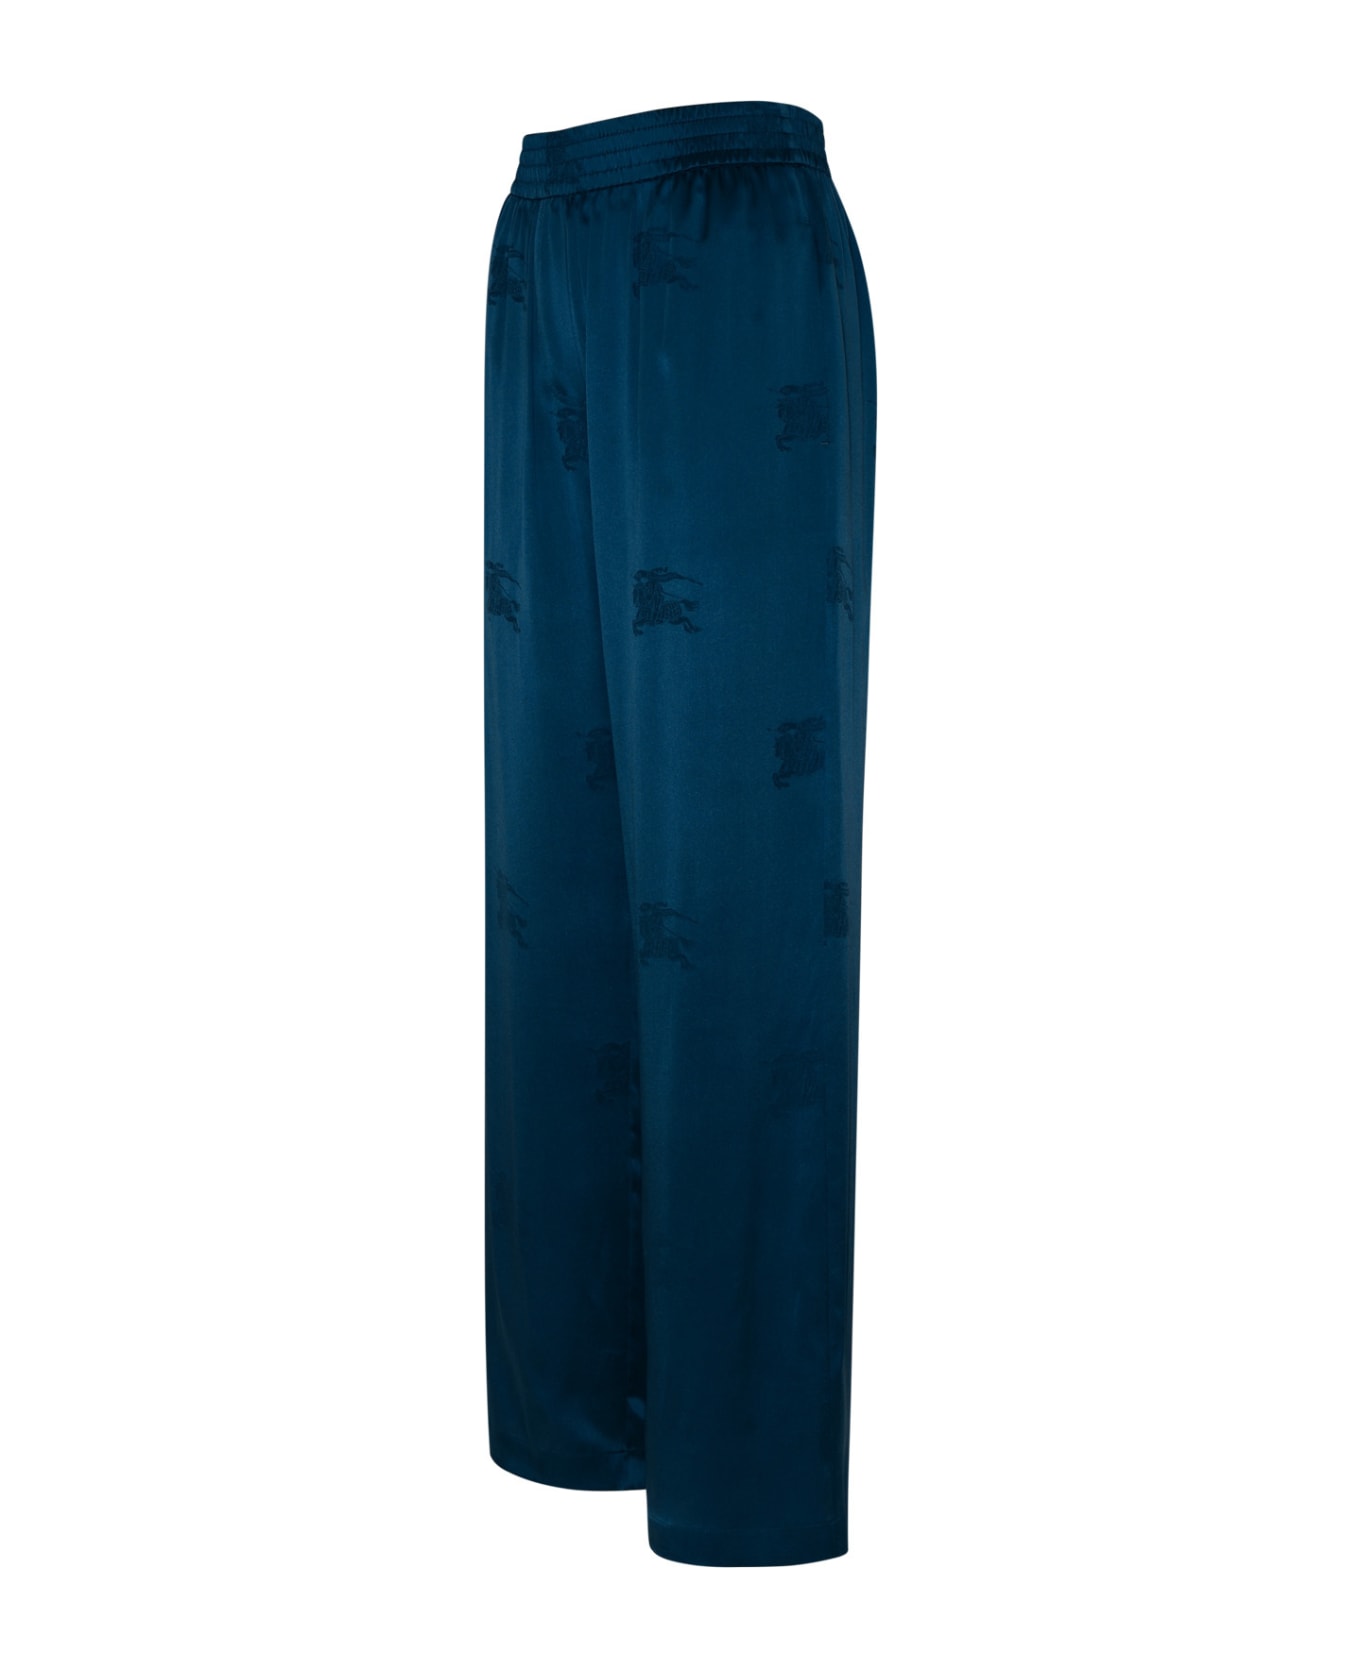 Burberry Unsead Navy Silk Pants - Muted navy ip pat ボトムス